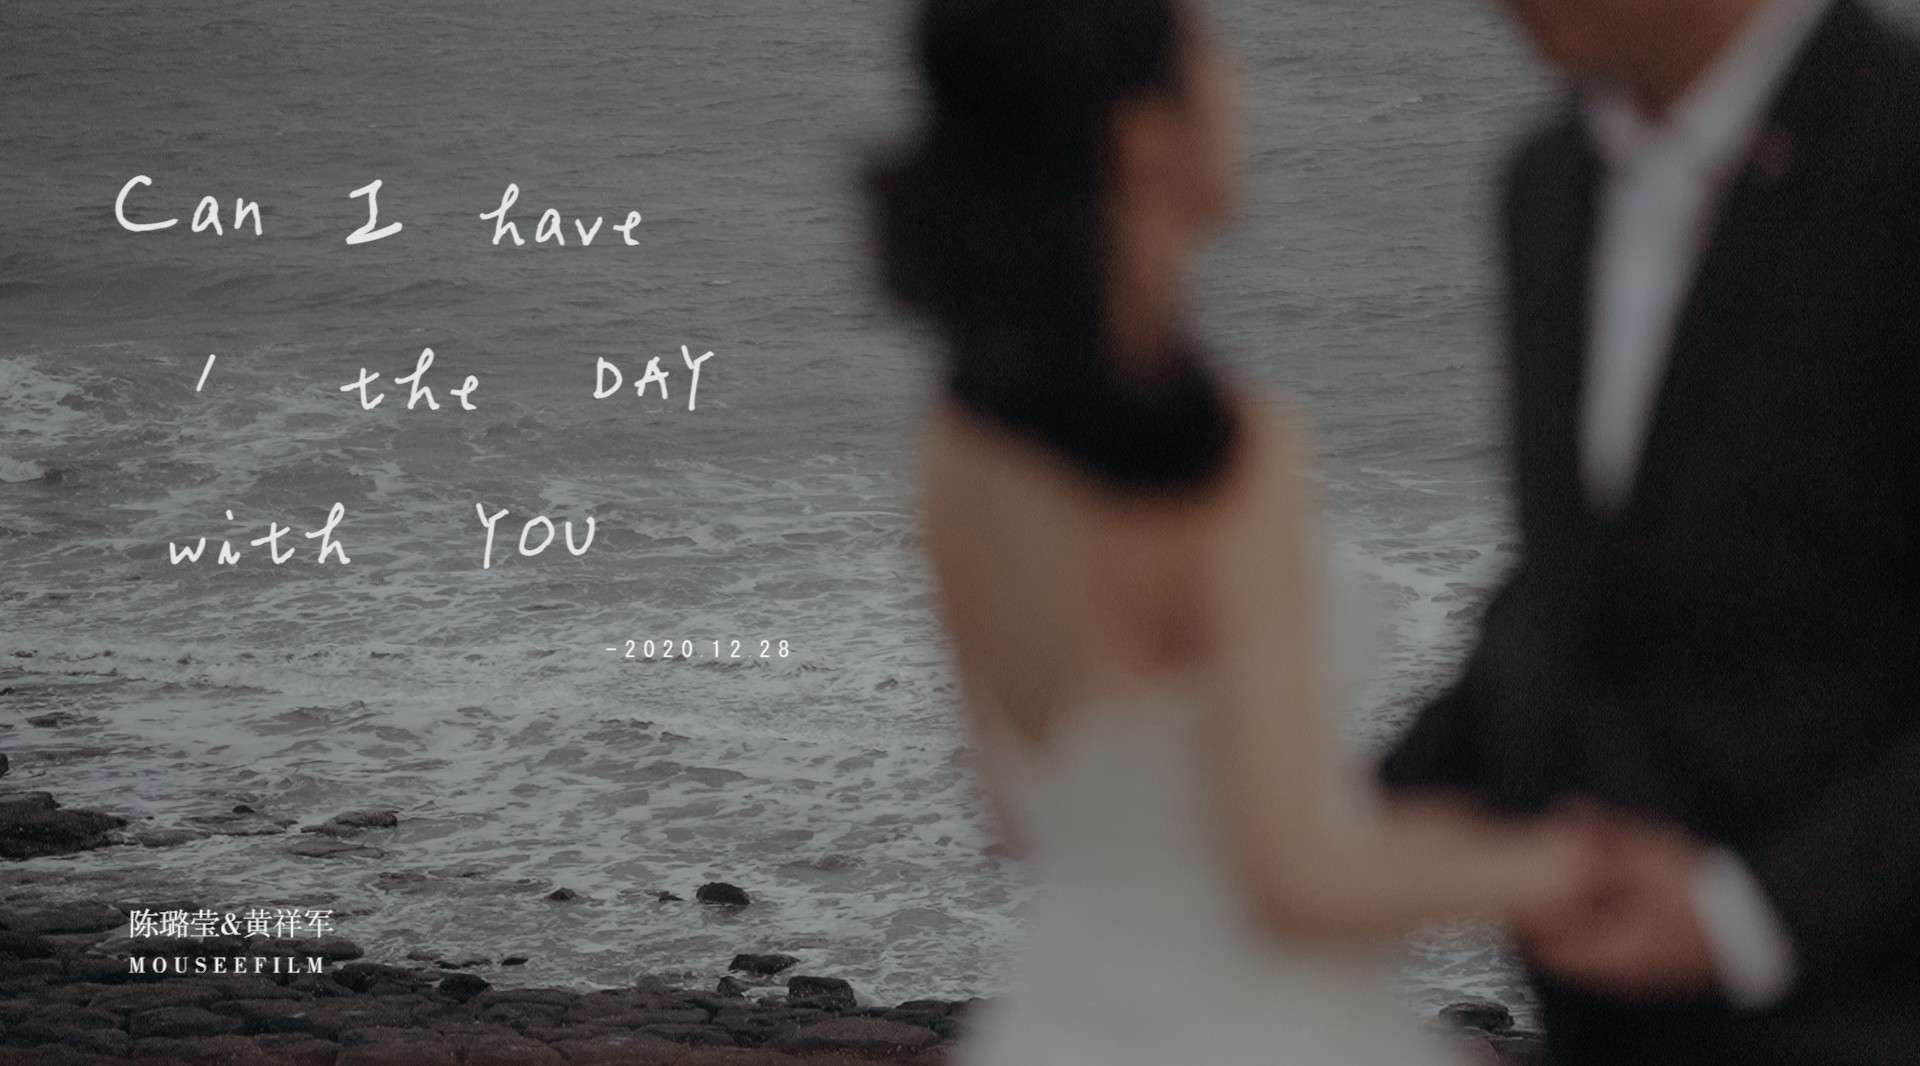 《CAN I HAVE THE DAY WITH YOU》-婚前微电影